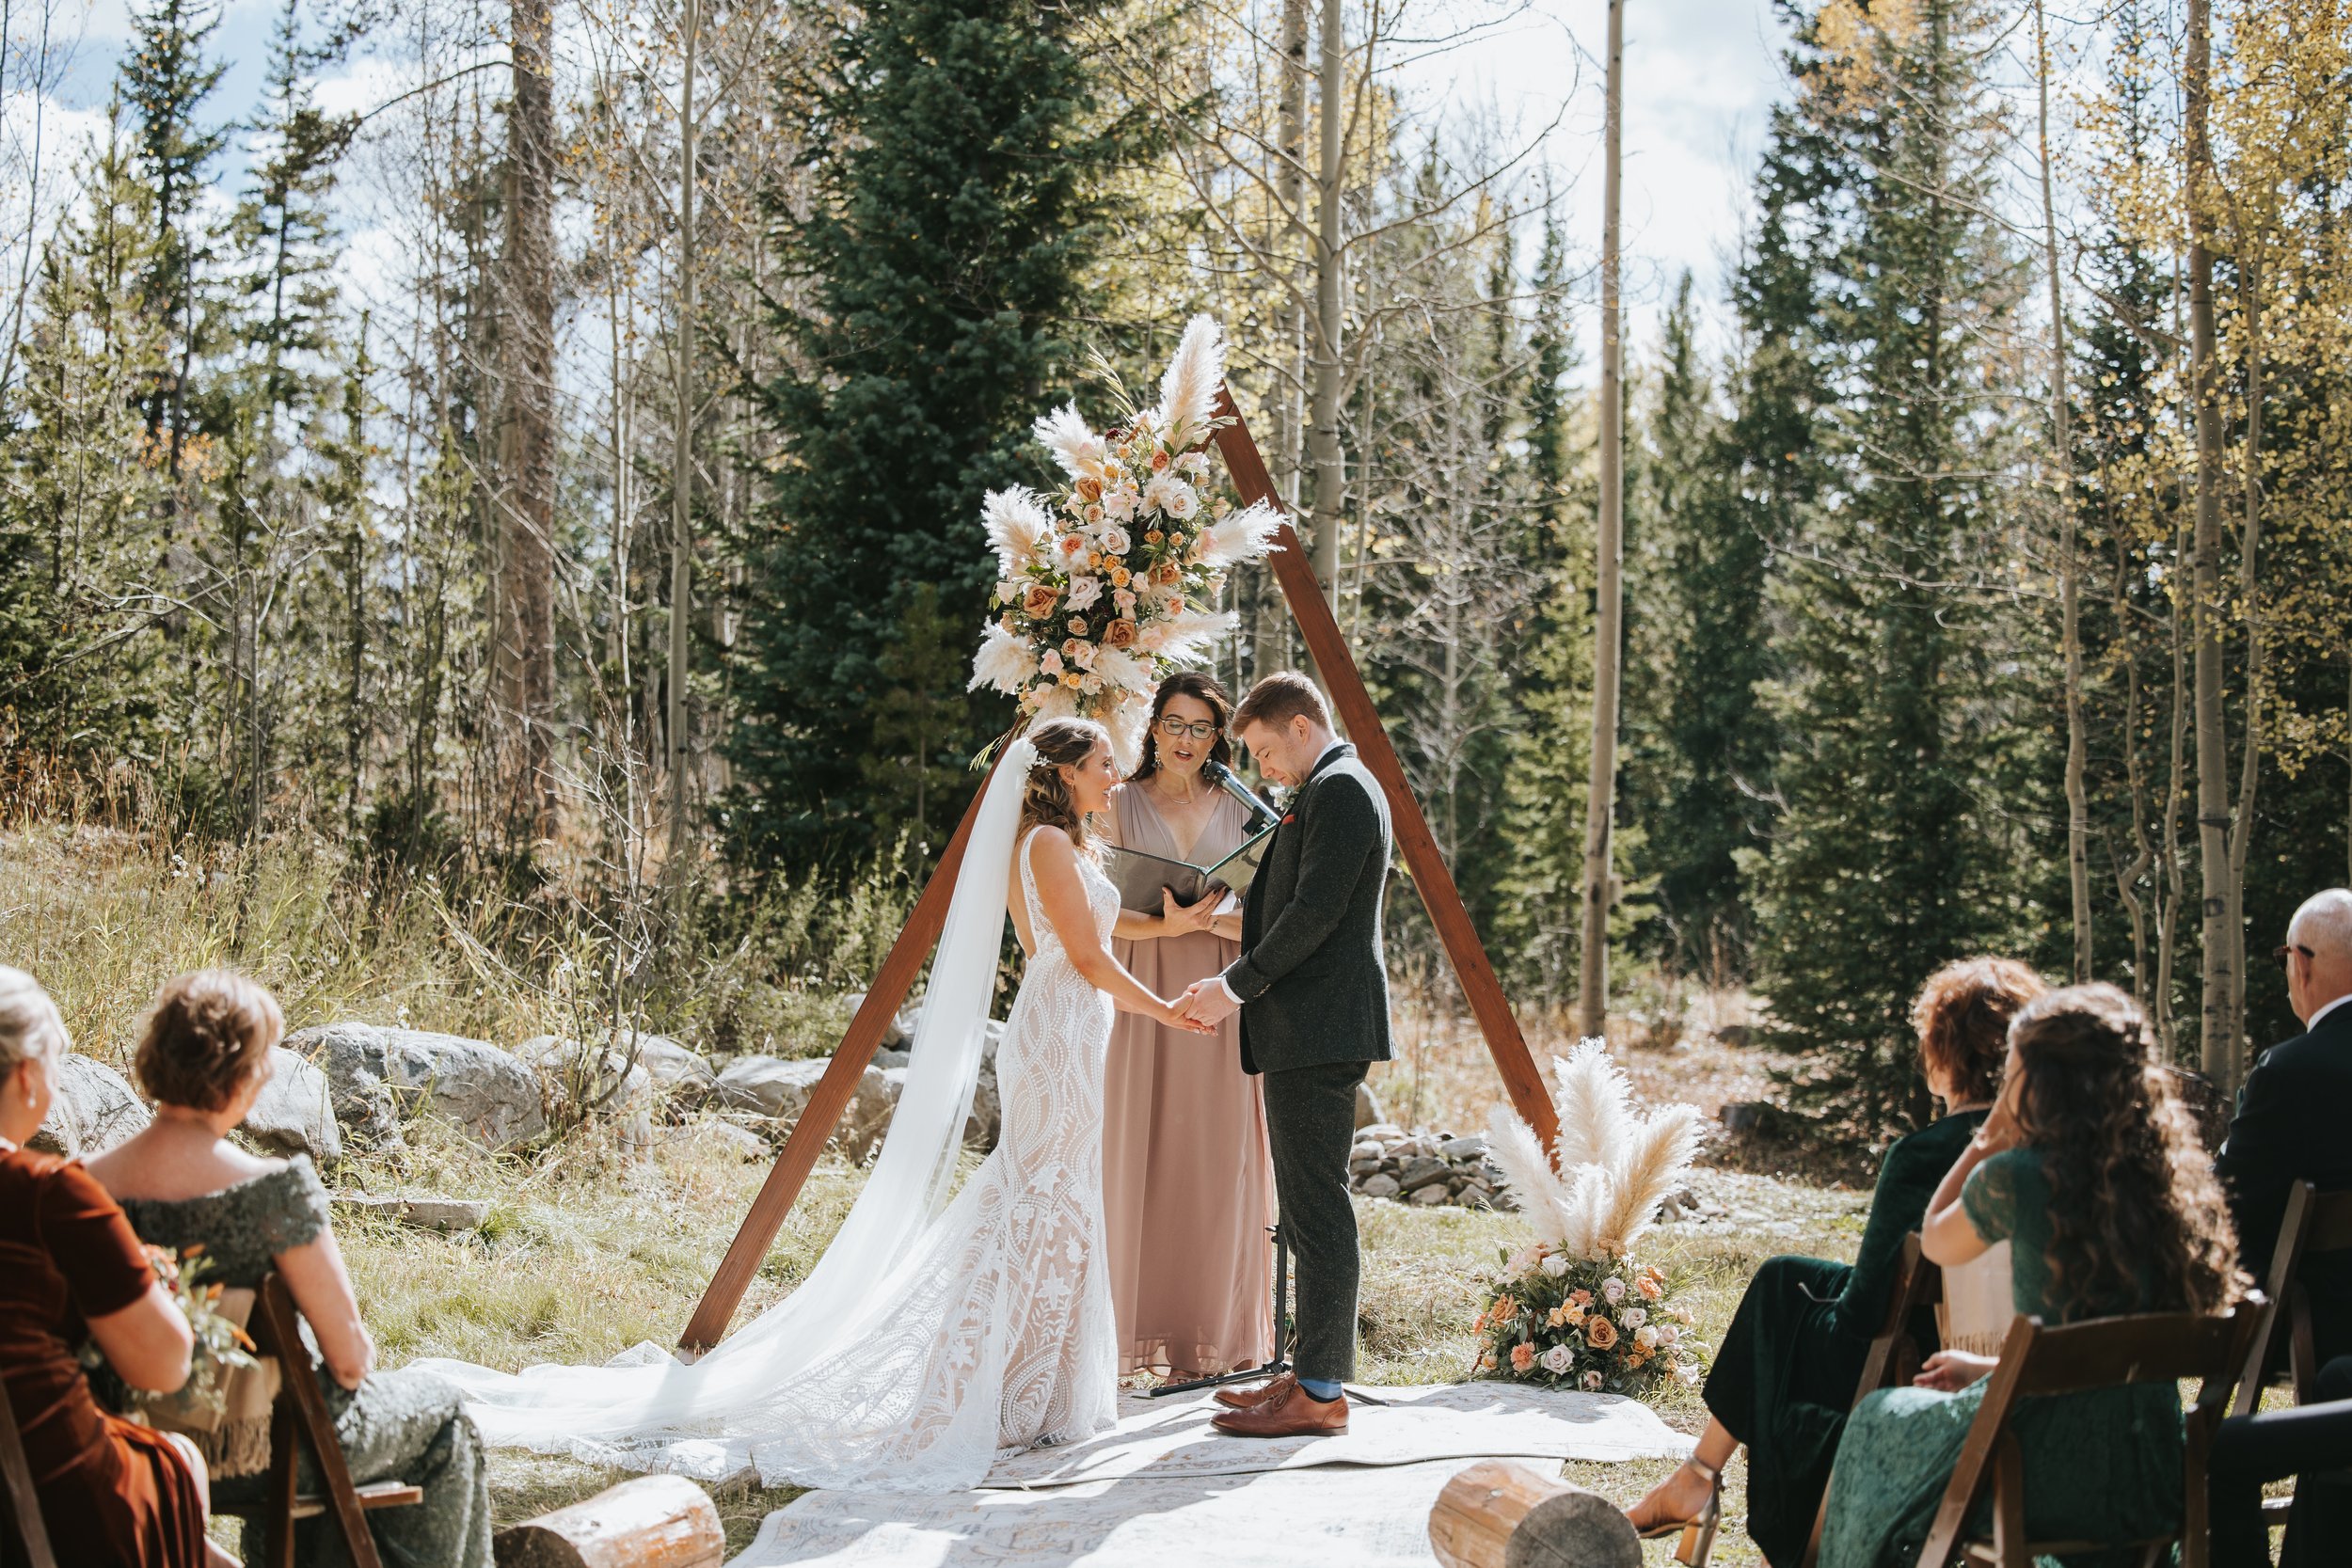 A small backyard ceremony for a micro wedding in the mountains